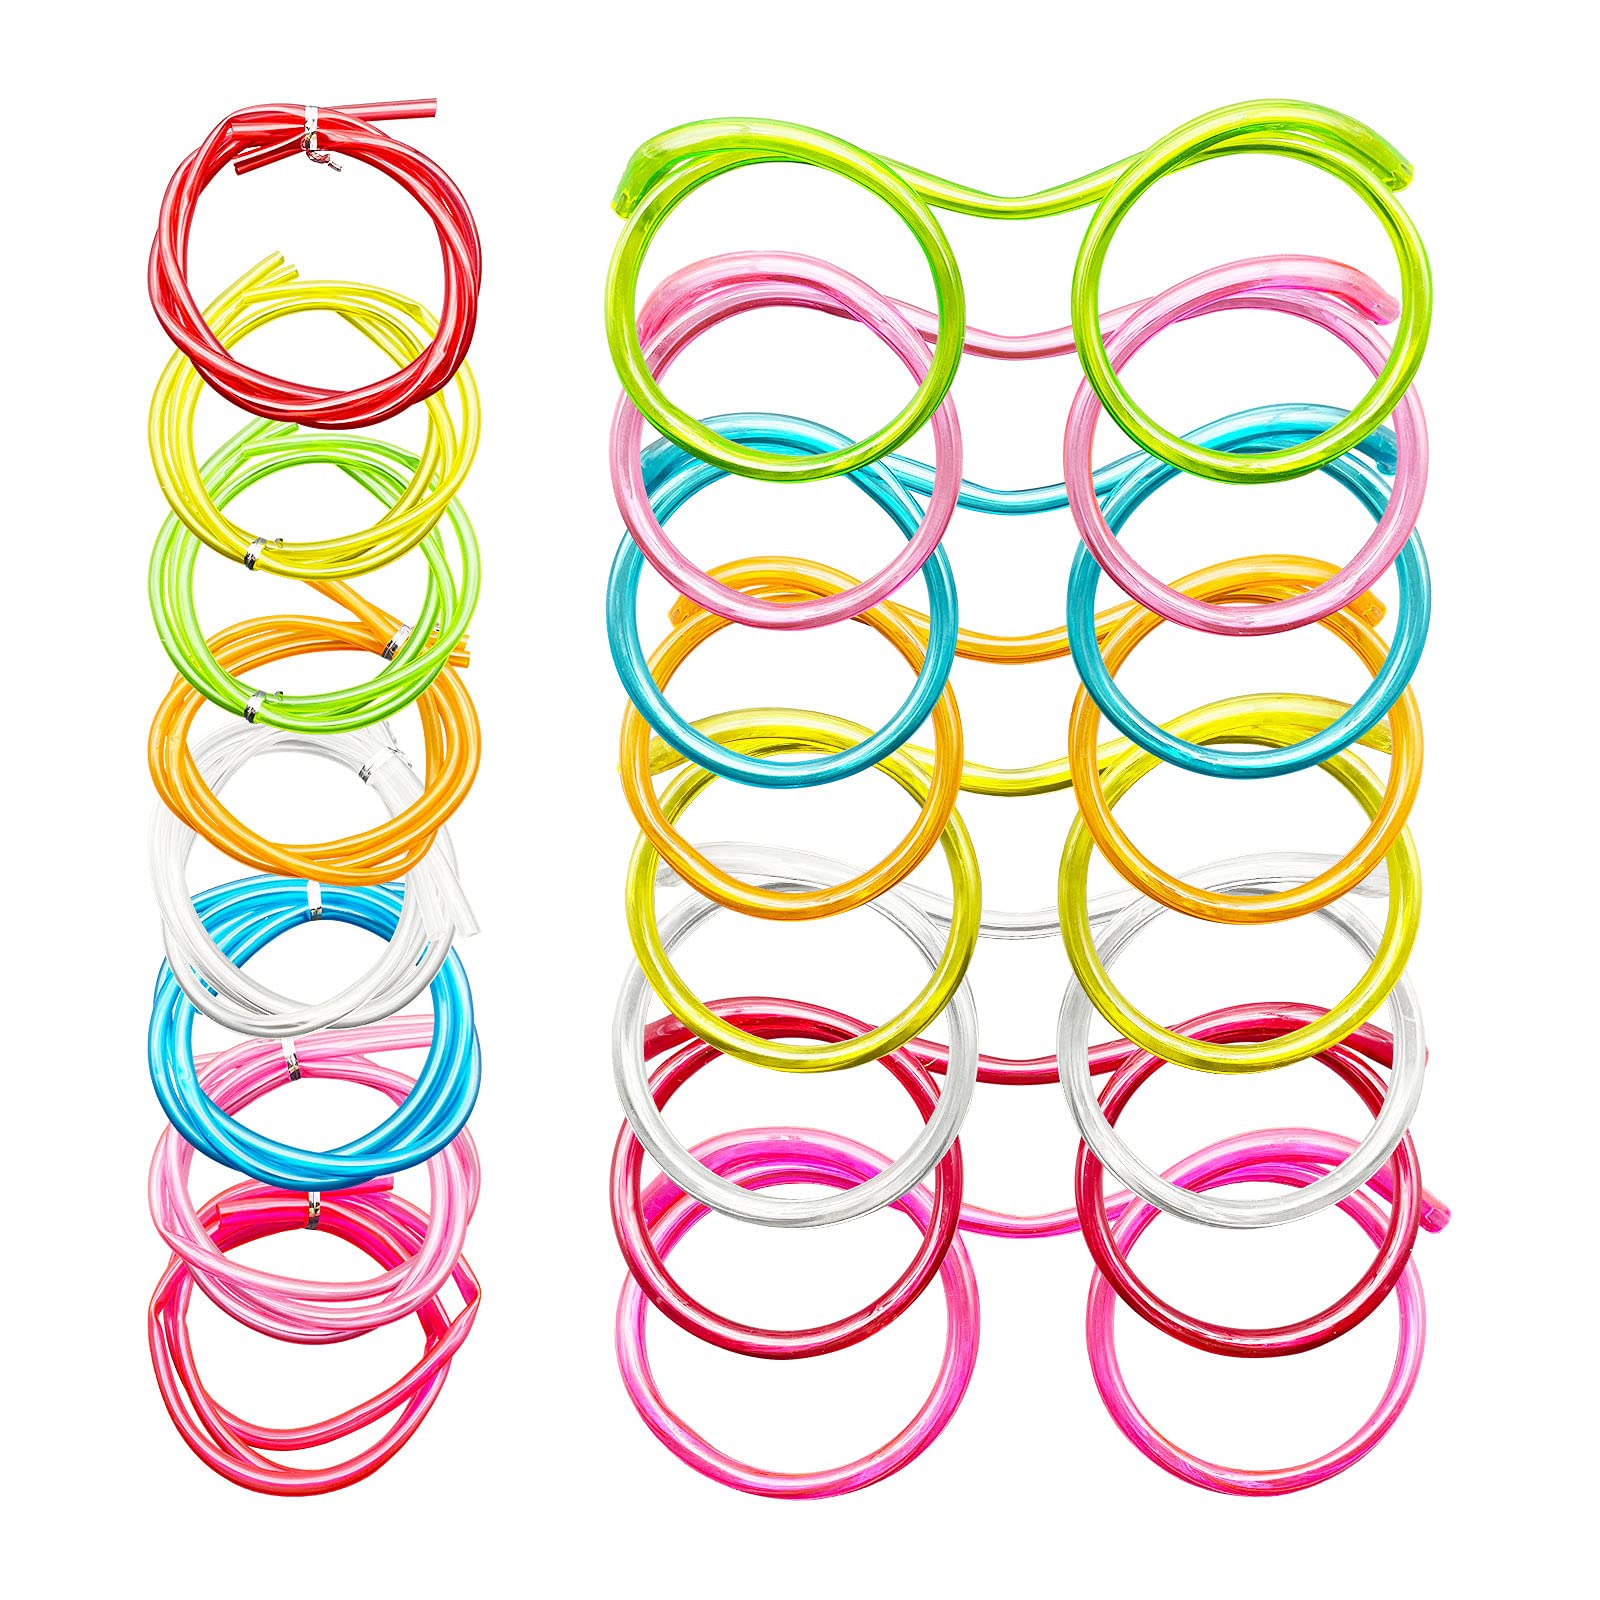 8pcs Silly Straw Glasses, Reusable Fun Loop Drinking Straw Eye Glasses, Novelty Eyeglasses Straw for Party Annual Meeting Parties Birthday (8 Colors)